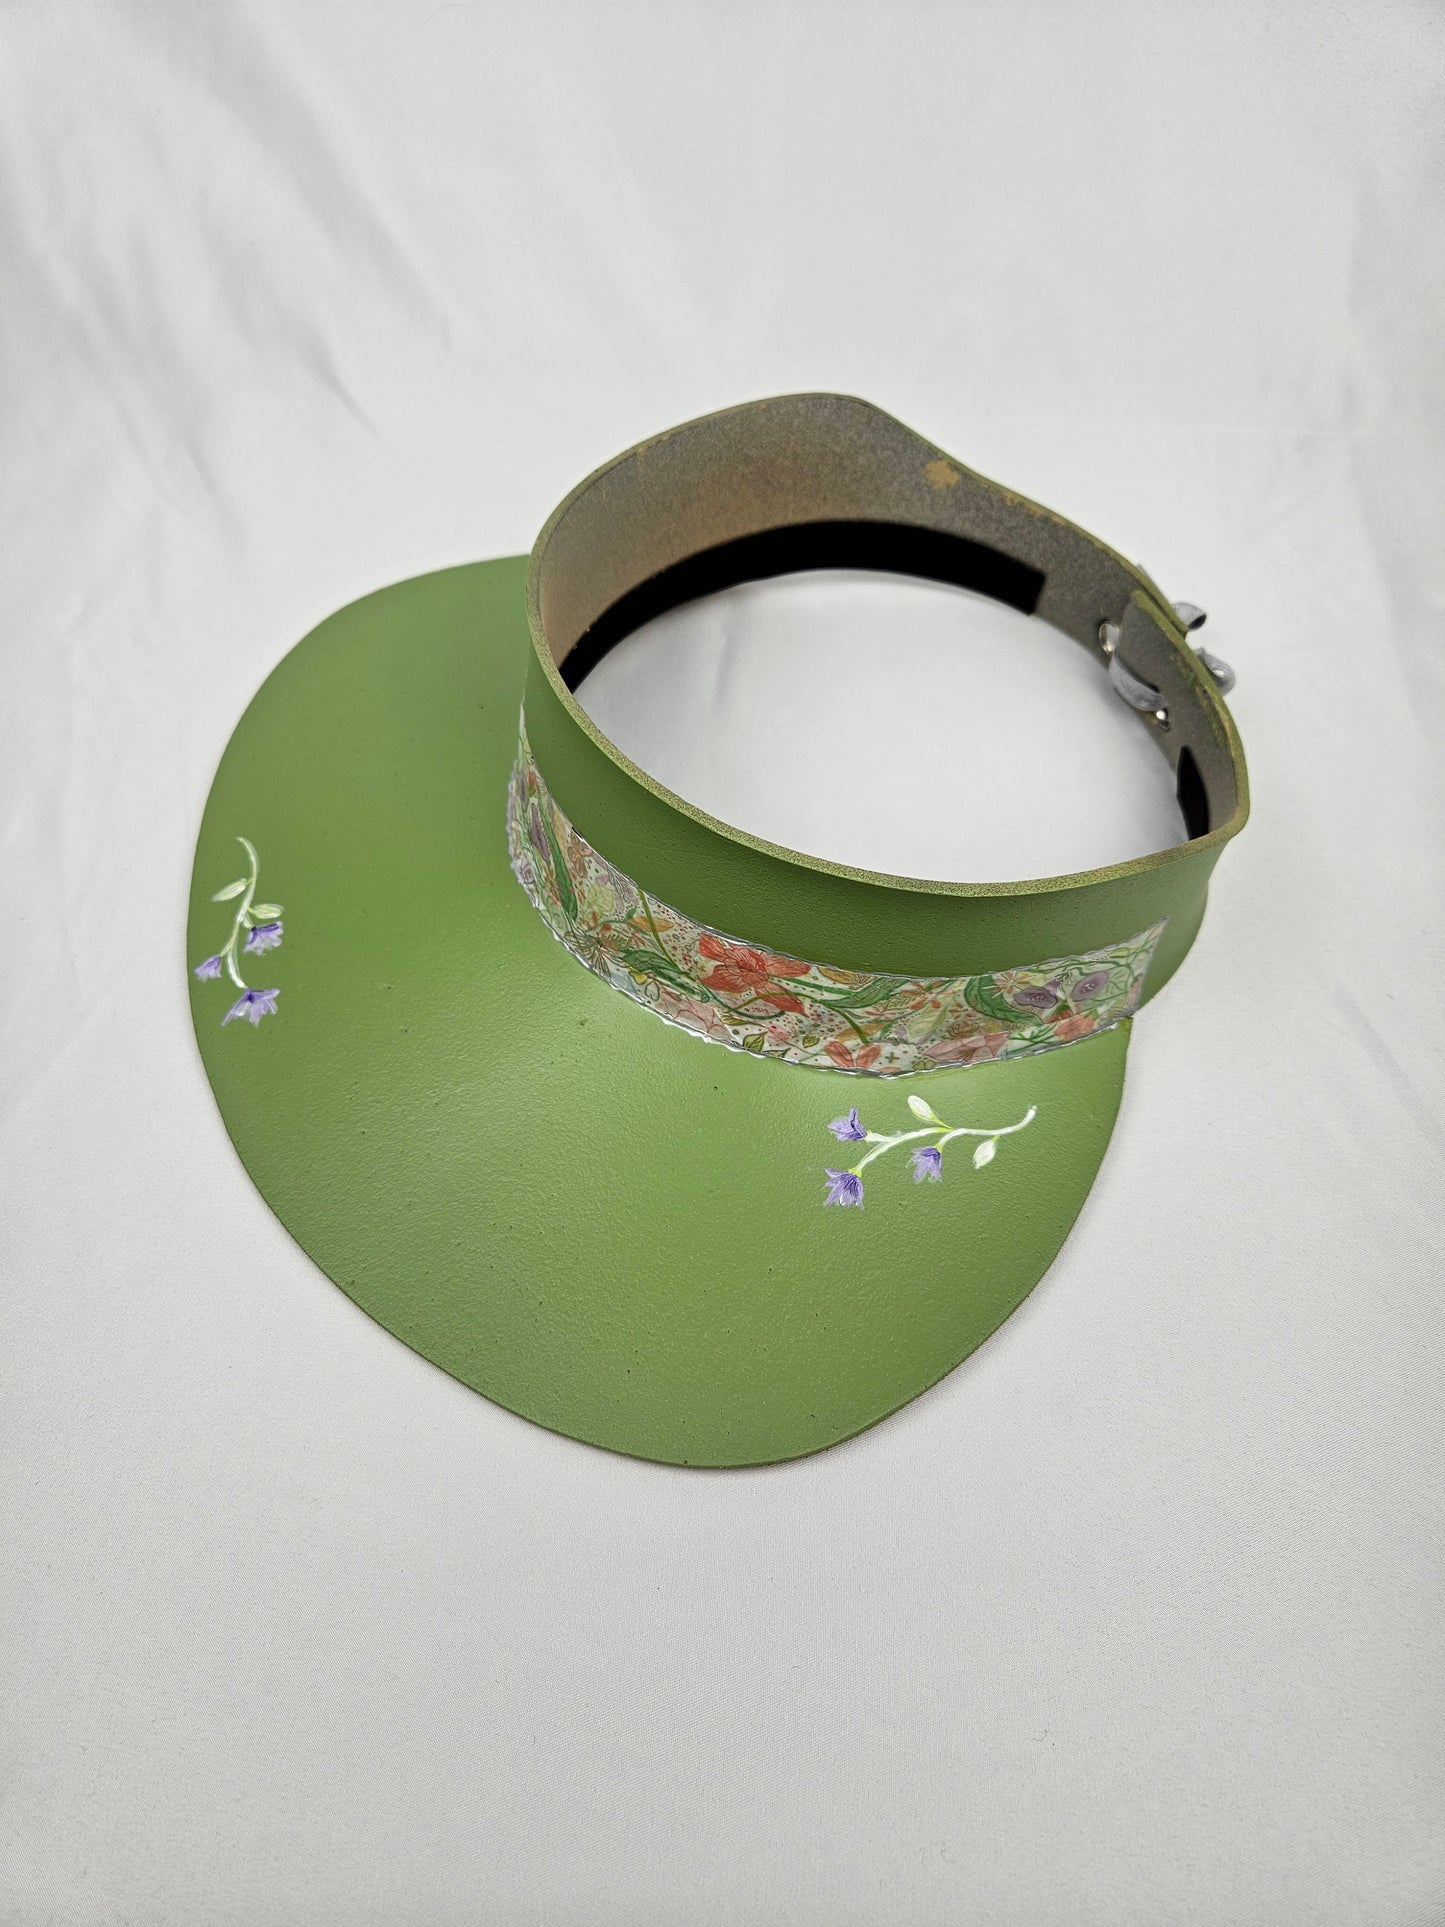 Spring/Summer Audrey Foam Sun Visor Hat with Bright Pastel Garden Band and Handpainted Floral Motif: Derby, Church, Golf, Pool, UV Resistant, No Headache